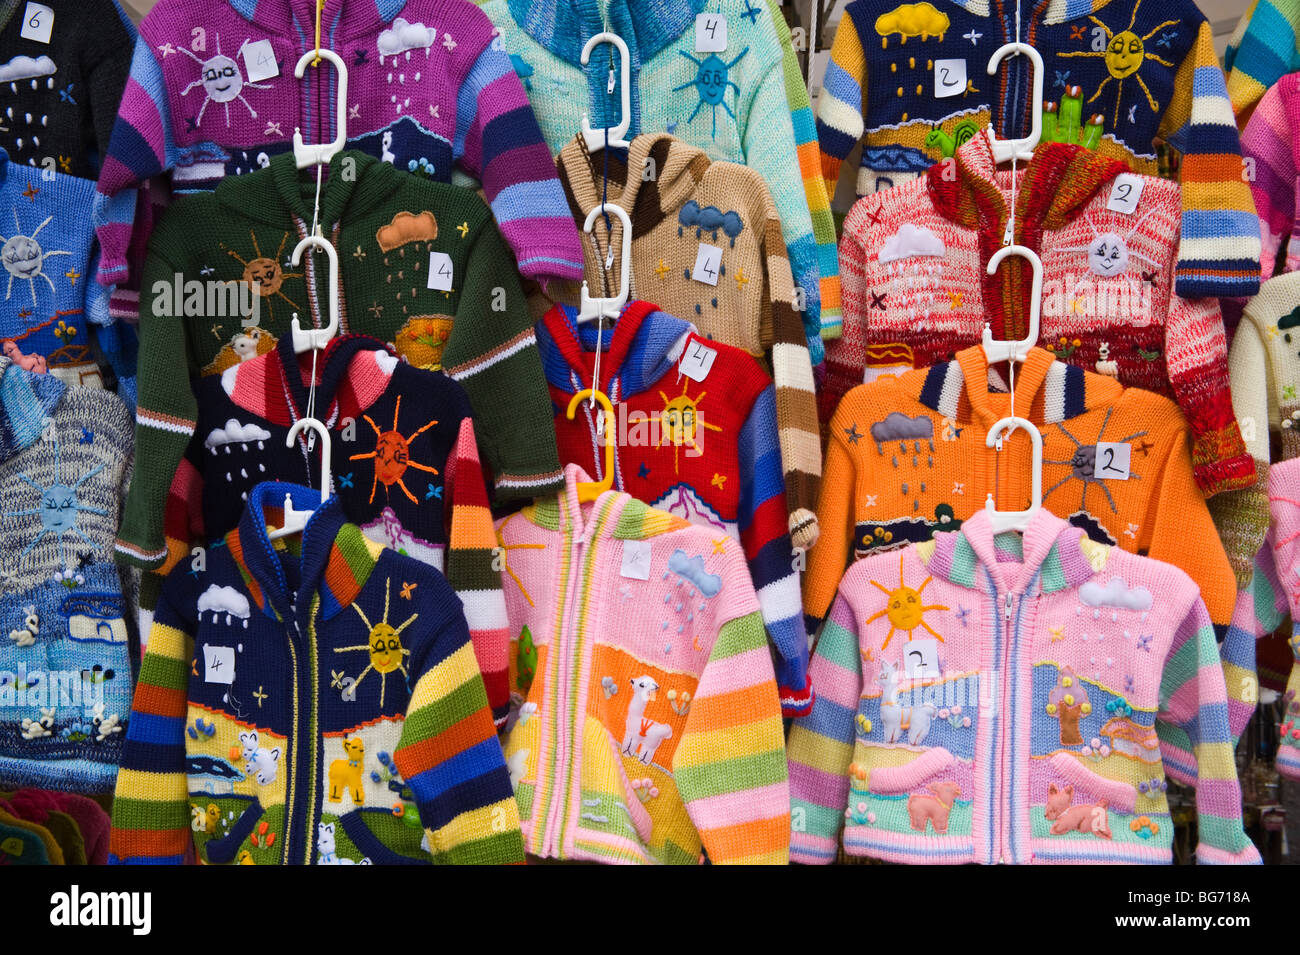 Colourful woolen knitwear for sale on market stall during Usk Winter Festival Usk Monmouthshire South Wales UK Stock Photo